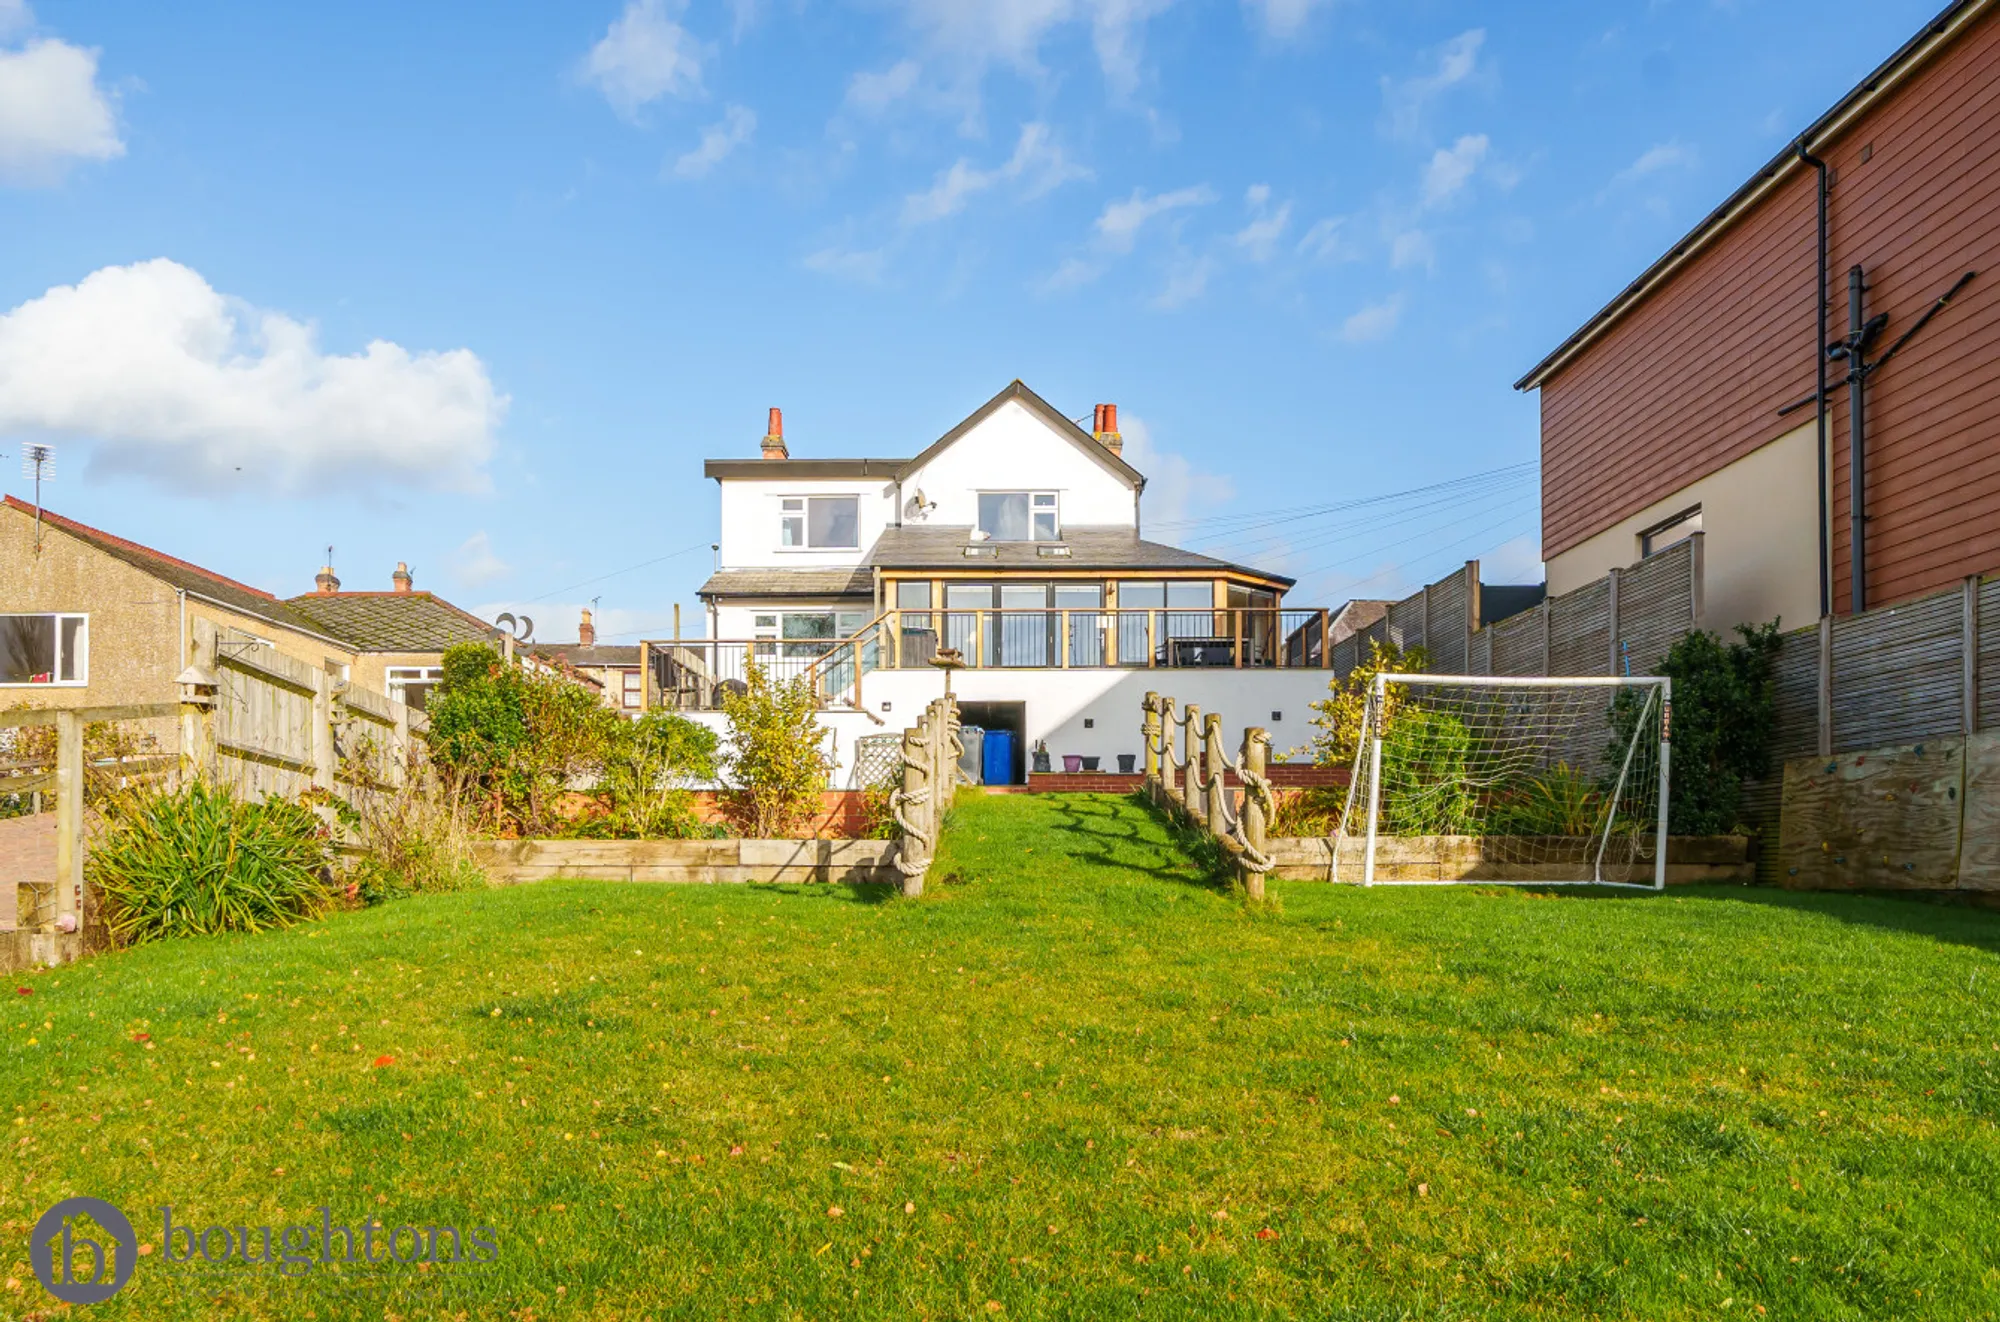 4 bed detached house for sale in Banbury Road, Brackley - Property Image 1